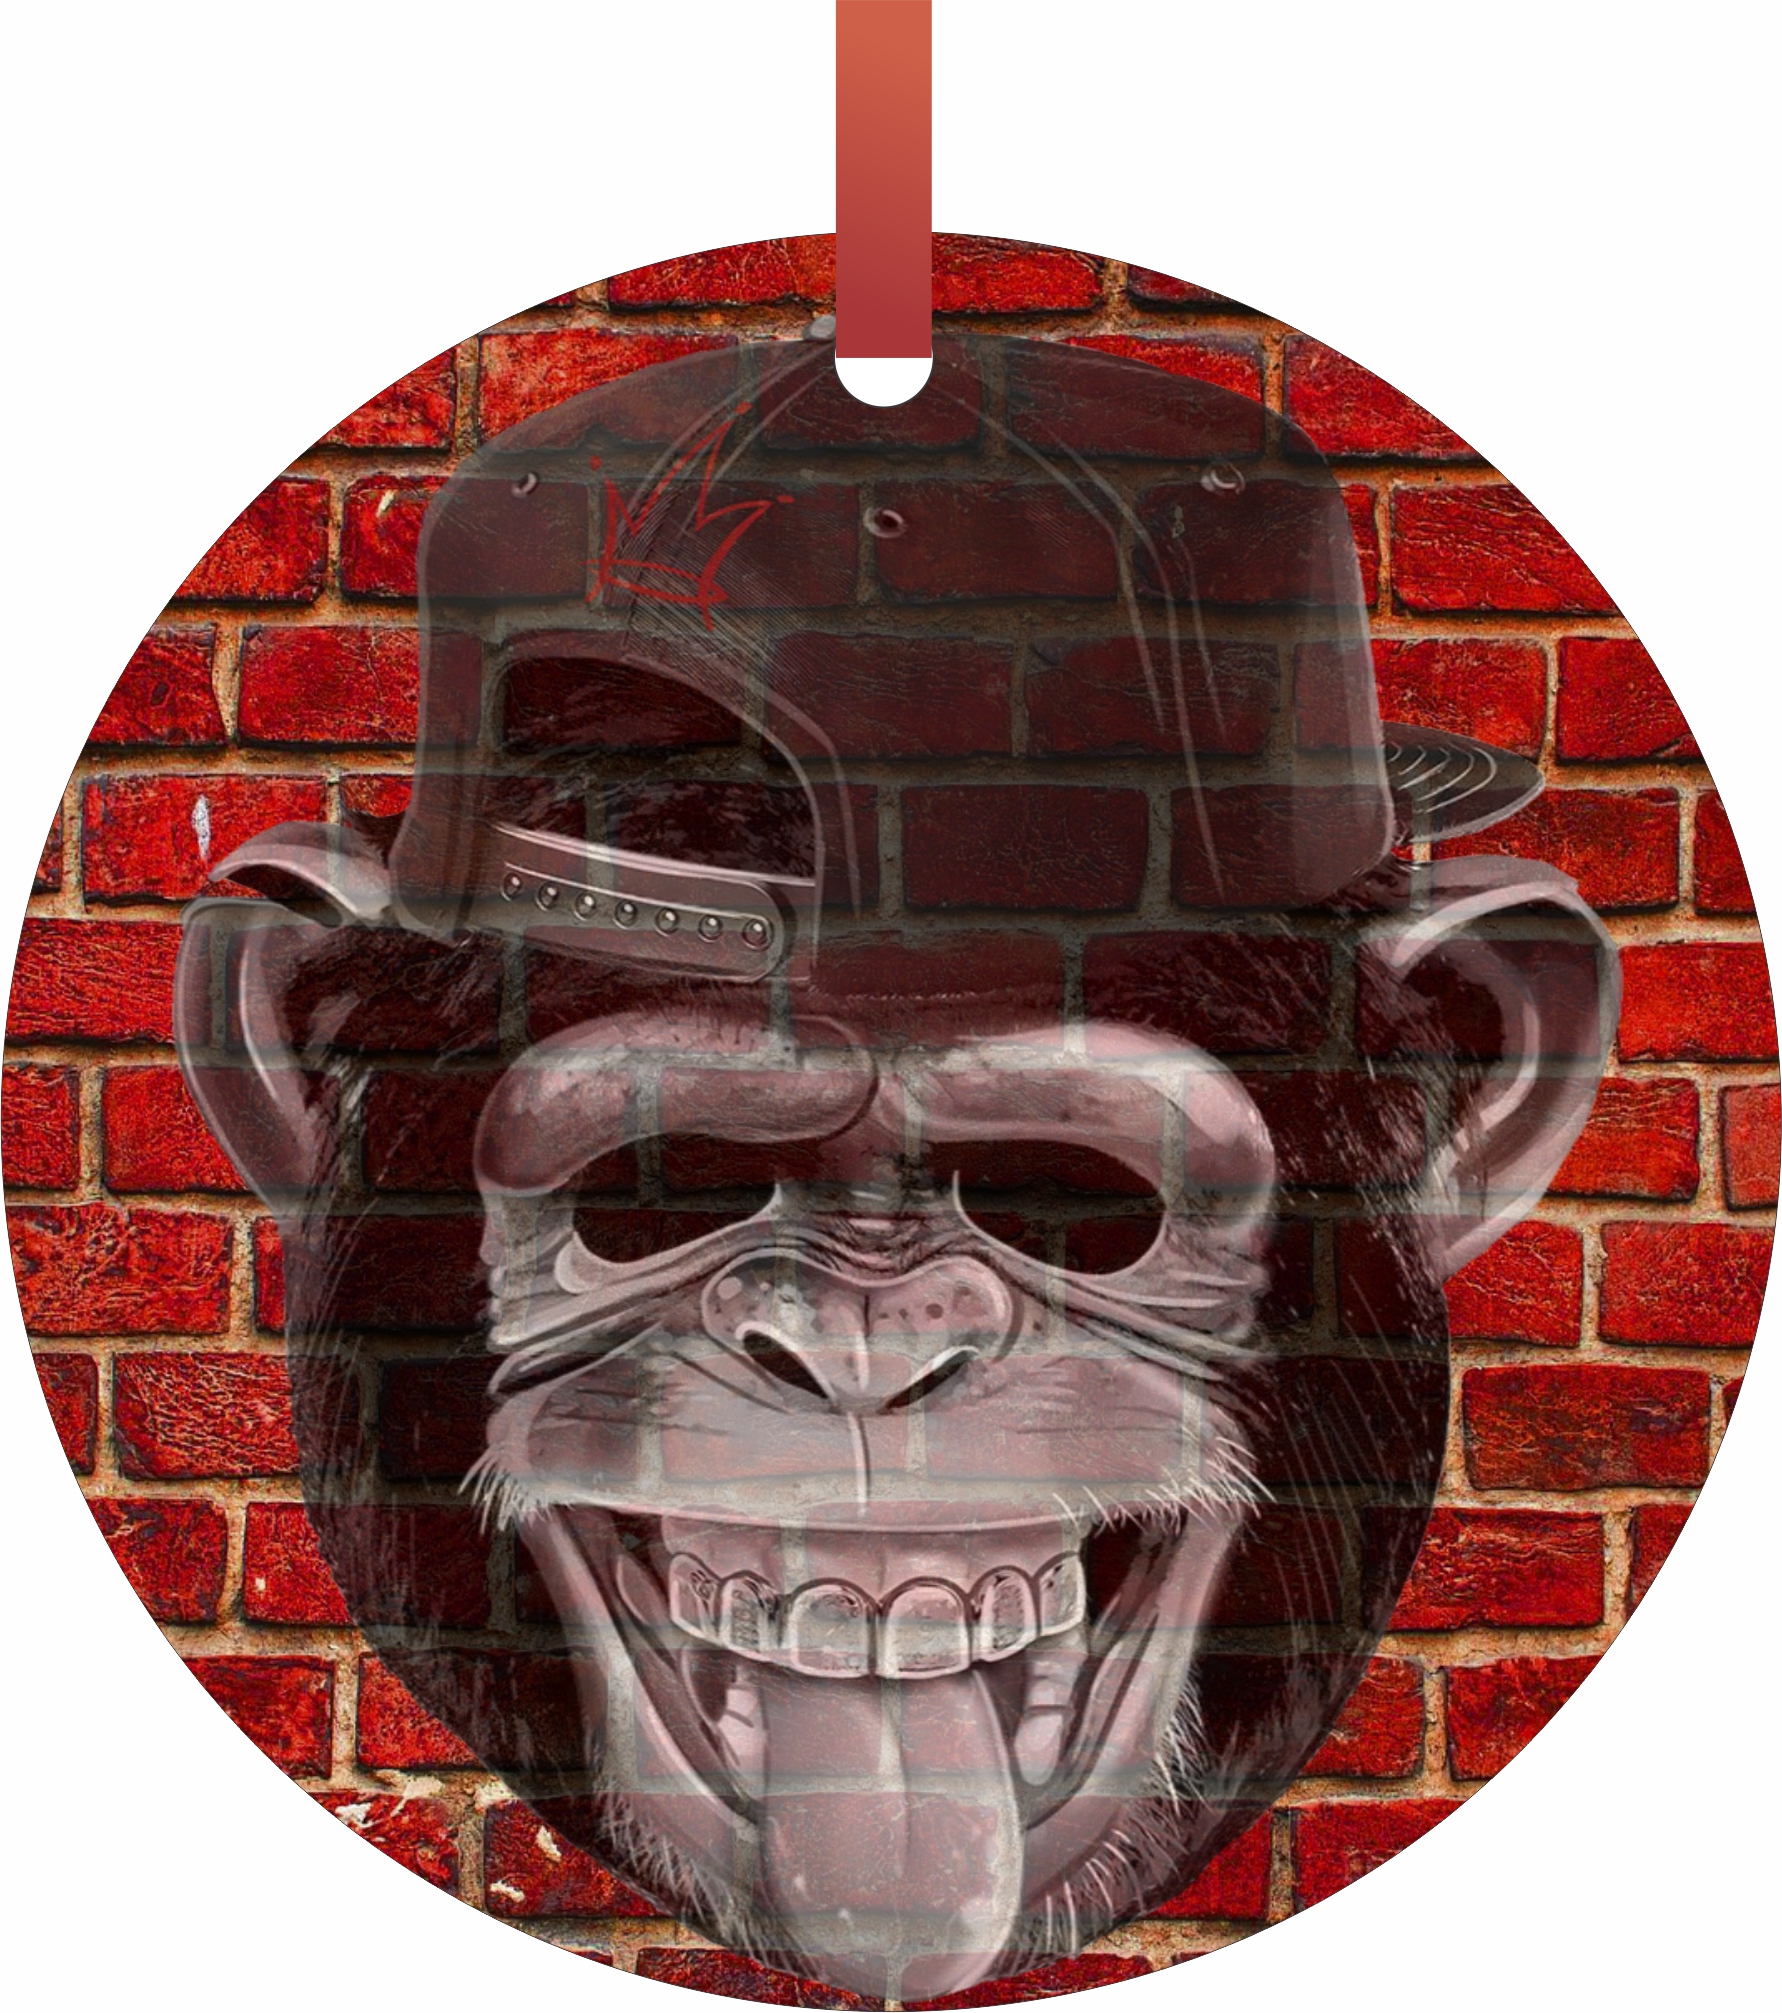 Punk Monkey Brick Wall Street Art Style Print Flat Round - Shaped Christmas Holiday Ornament - Double-Sided - Made in the U.S.A. - image 1 of 1